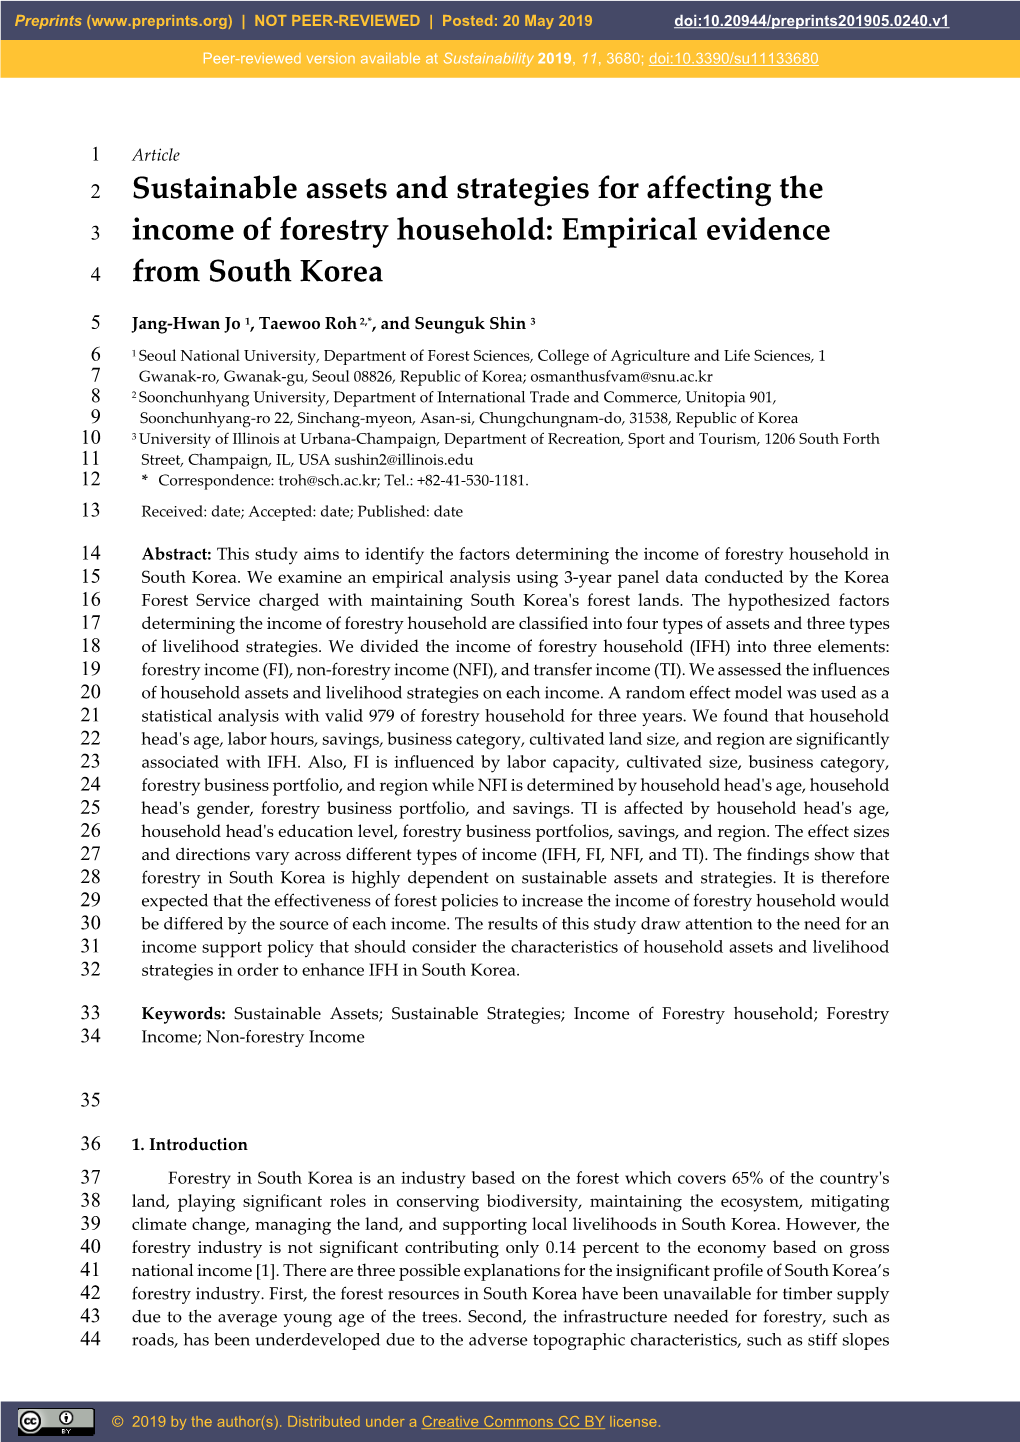 Sustainable Assets and Strategies for Affecting the Income of Forestry Household: Empirical Evidence from South Korea